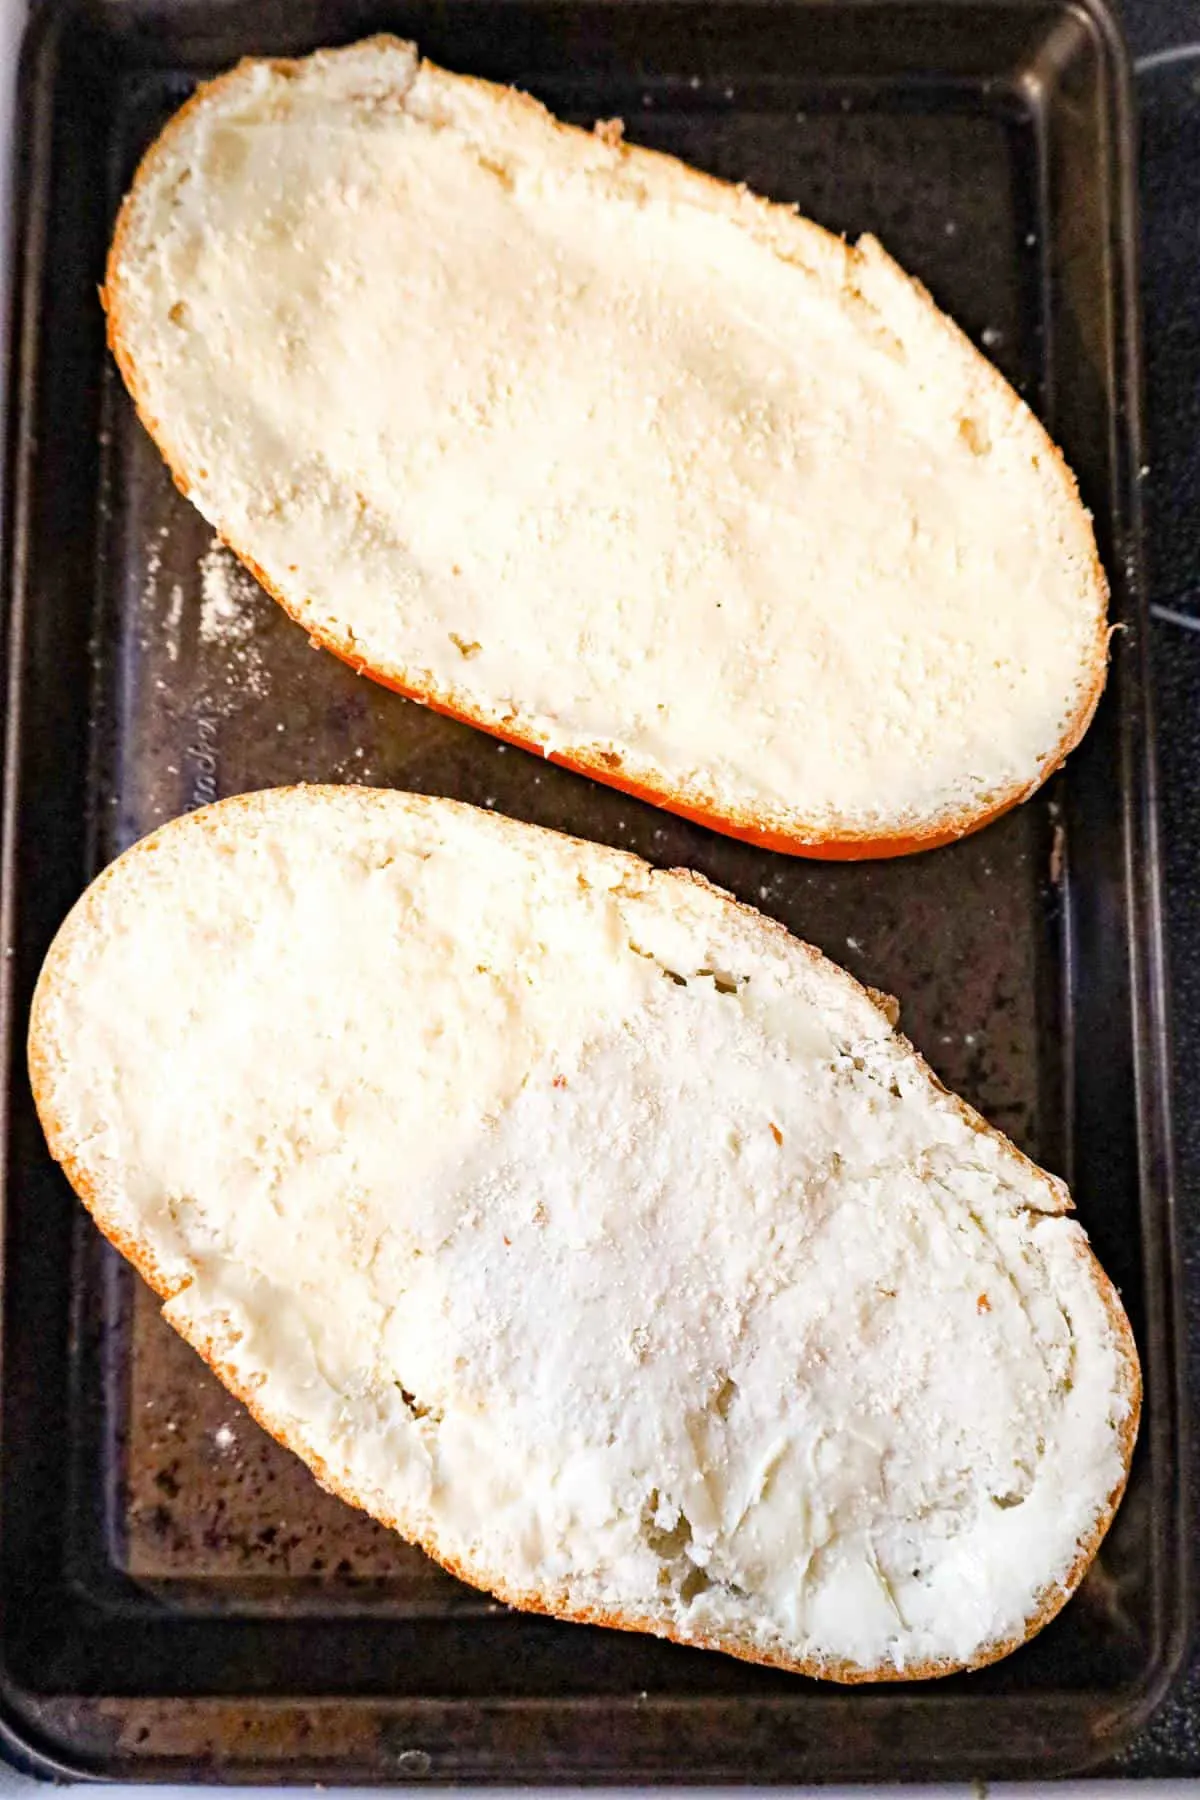 French bread spread with butter and garlic powder on a baking sheet